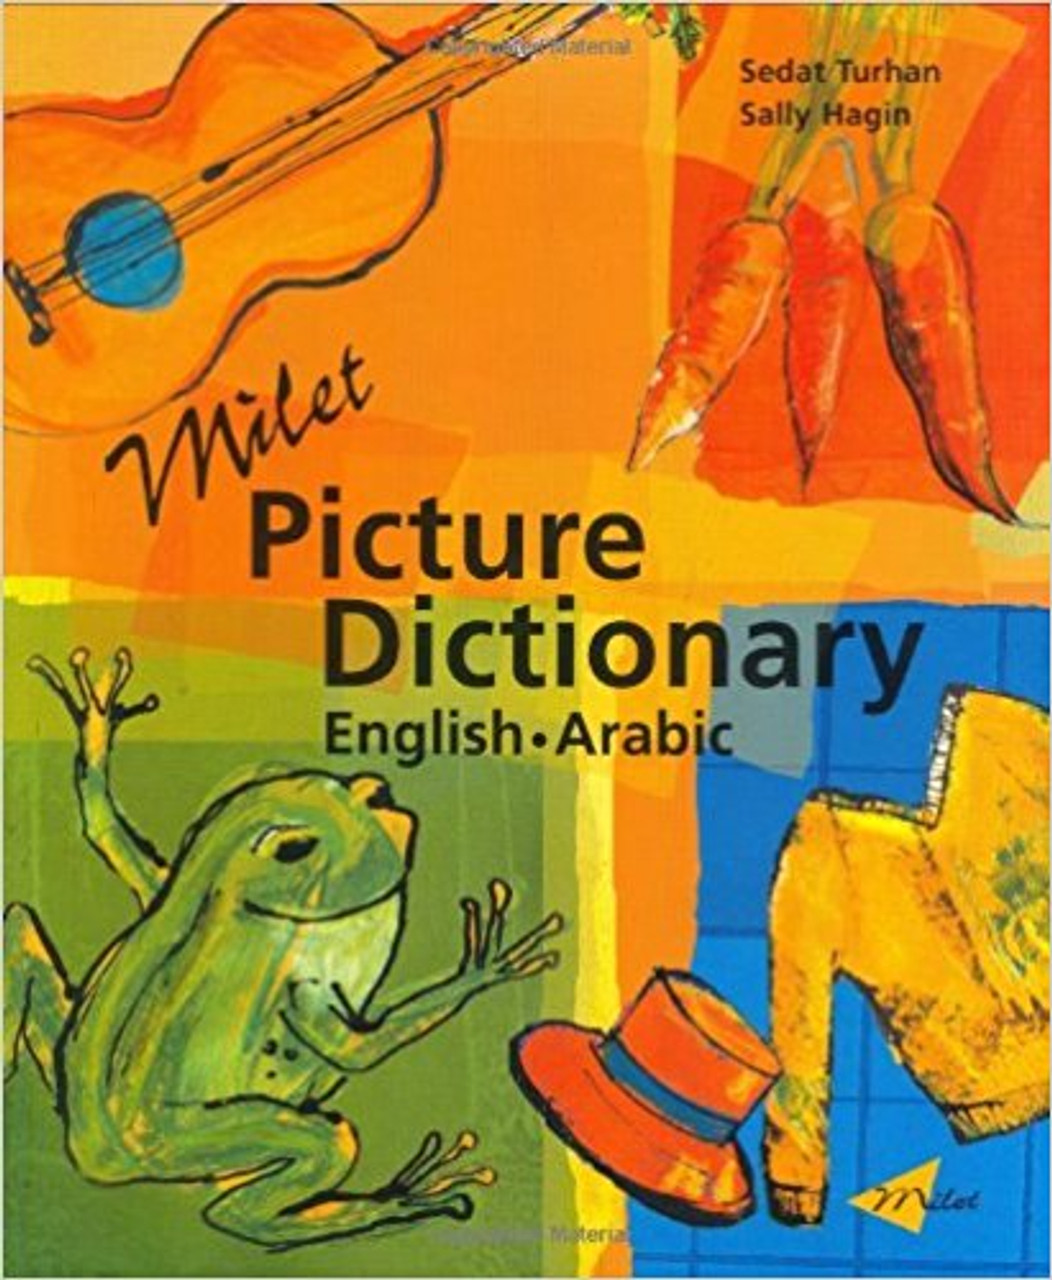 Milet Picture Dictionary (Arabic) by Sedat Turhan